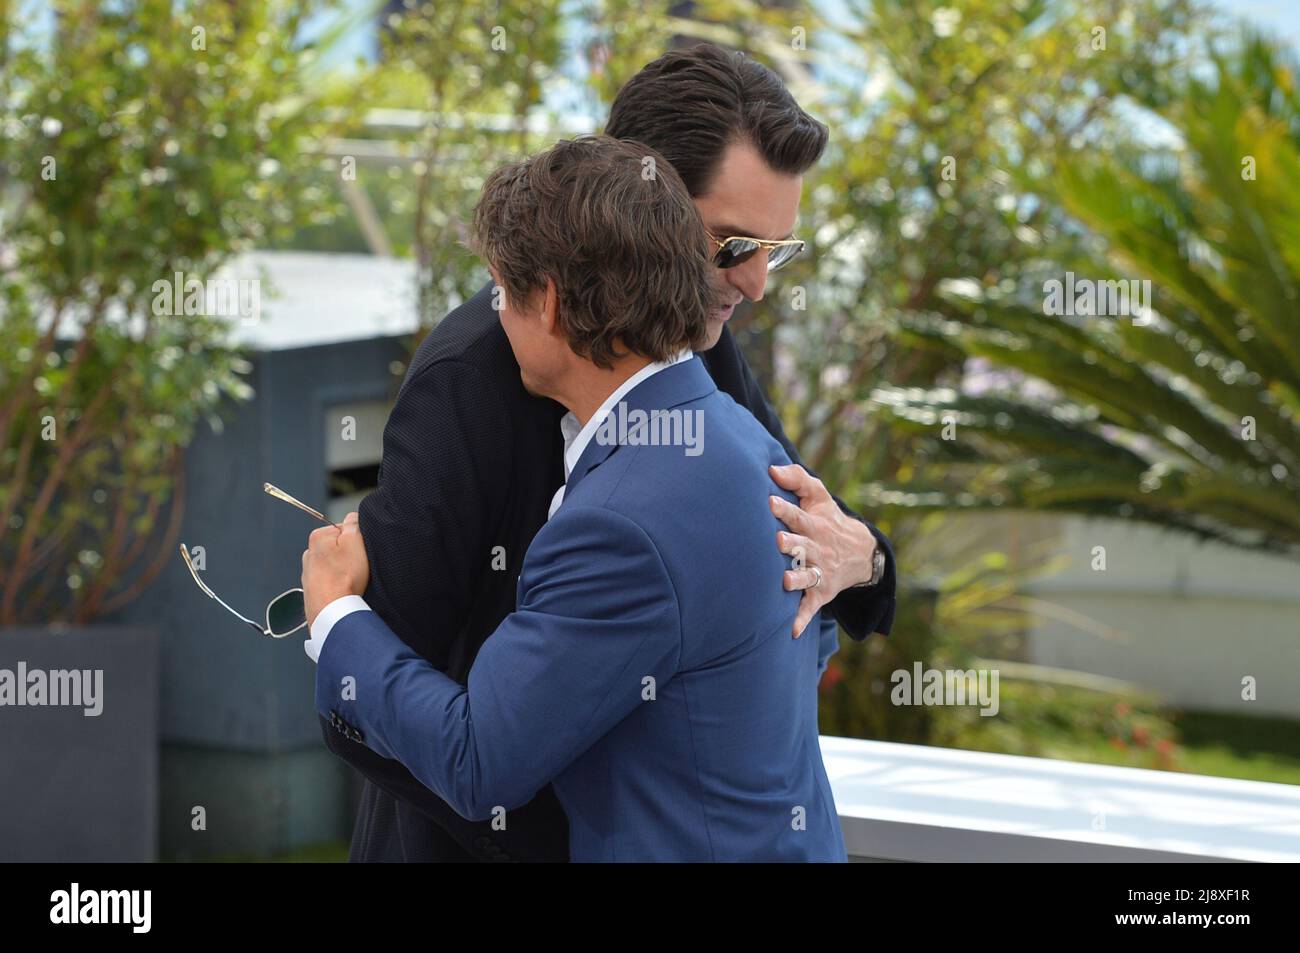 Cannes, France. 18th May, 2022. Joseph Kosinski and Tom Cruise attend the photocall of 'Top Gun: Maverick' during the 75th Annual Cannes Film Festival at Palais des Festivals. Credit: Stefanie Rex/dpa/Alamy Live News Stock Photo